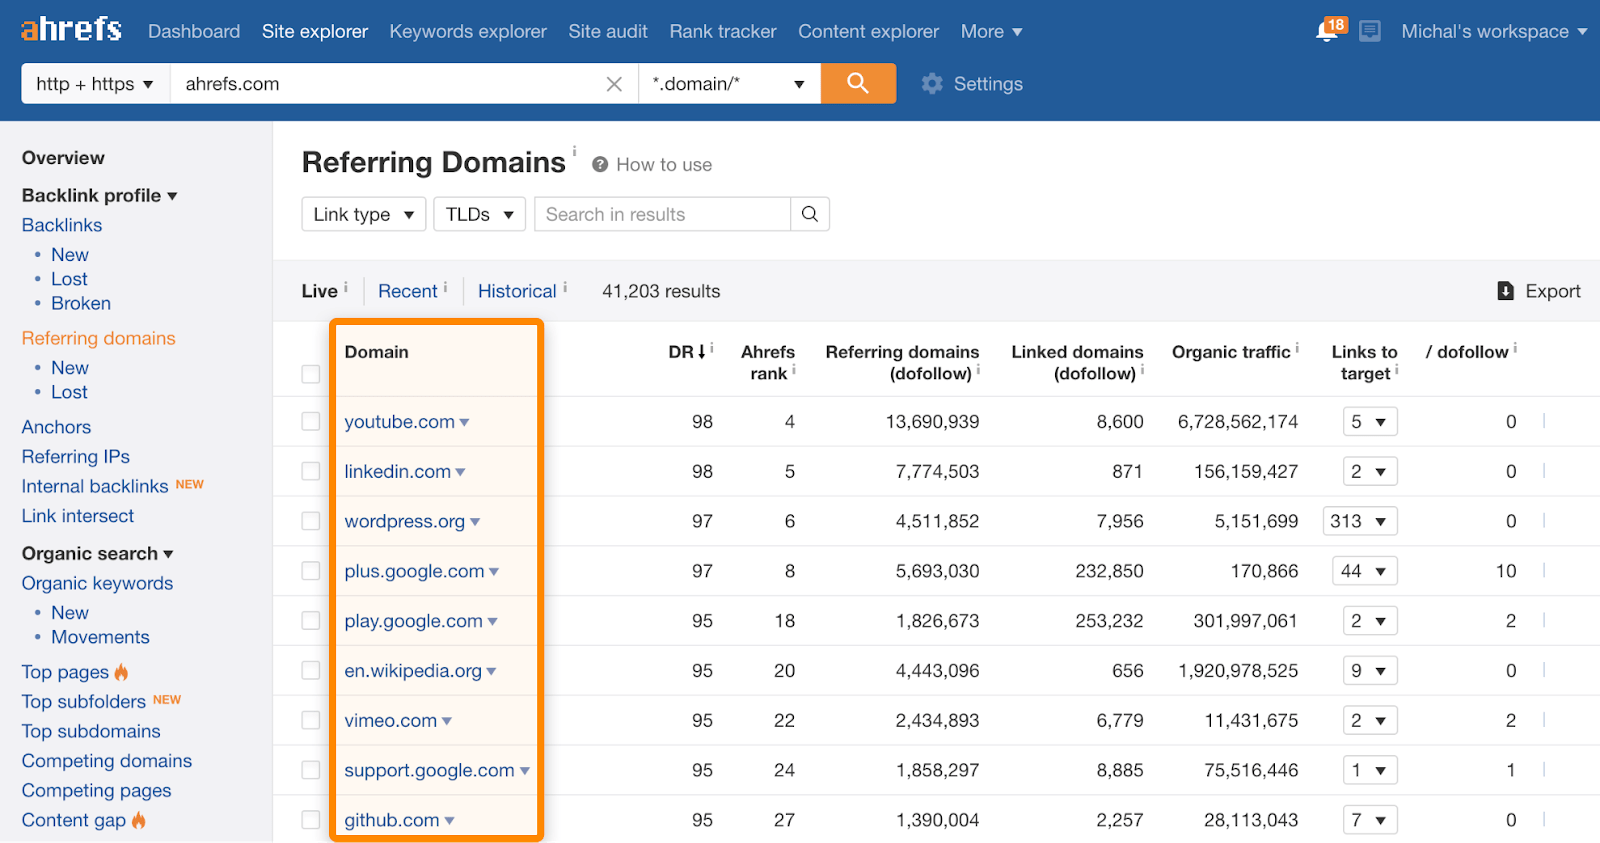 11 referring domains report